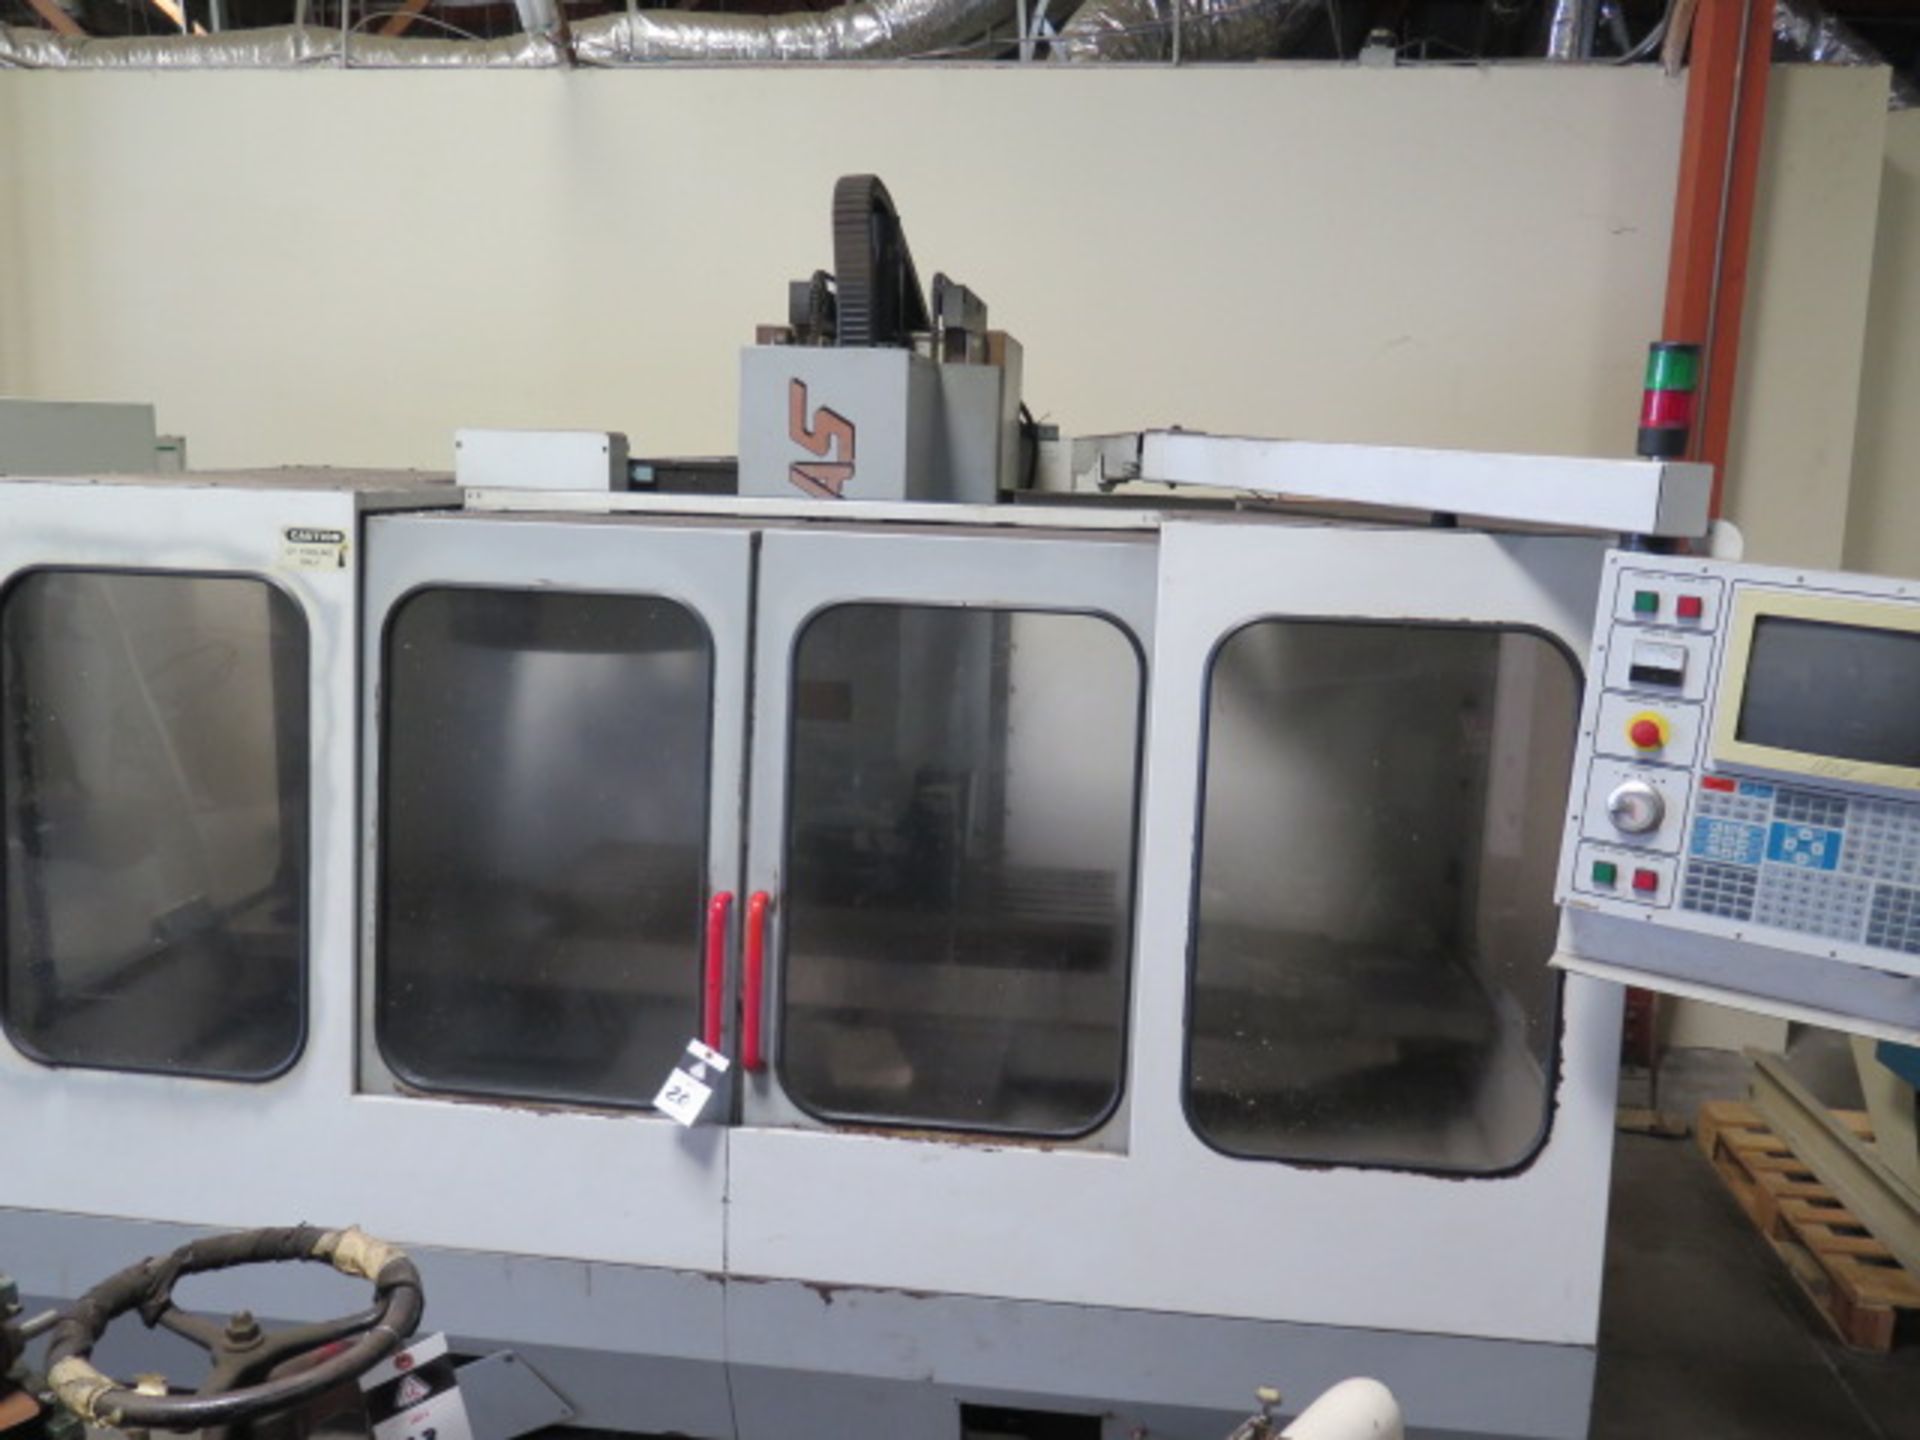 1995 Haas VF-4 4-Axis CNC VMC s/n 4478 w/ Haas Controls, 20-Station ATC, CAT-40, SOLD AS IS